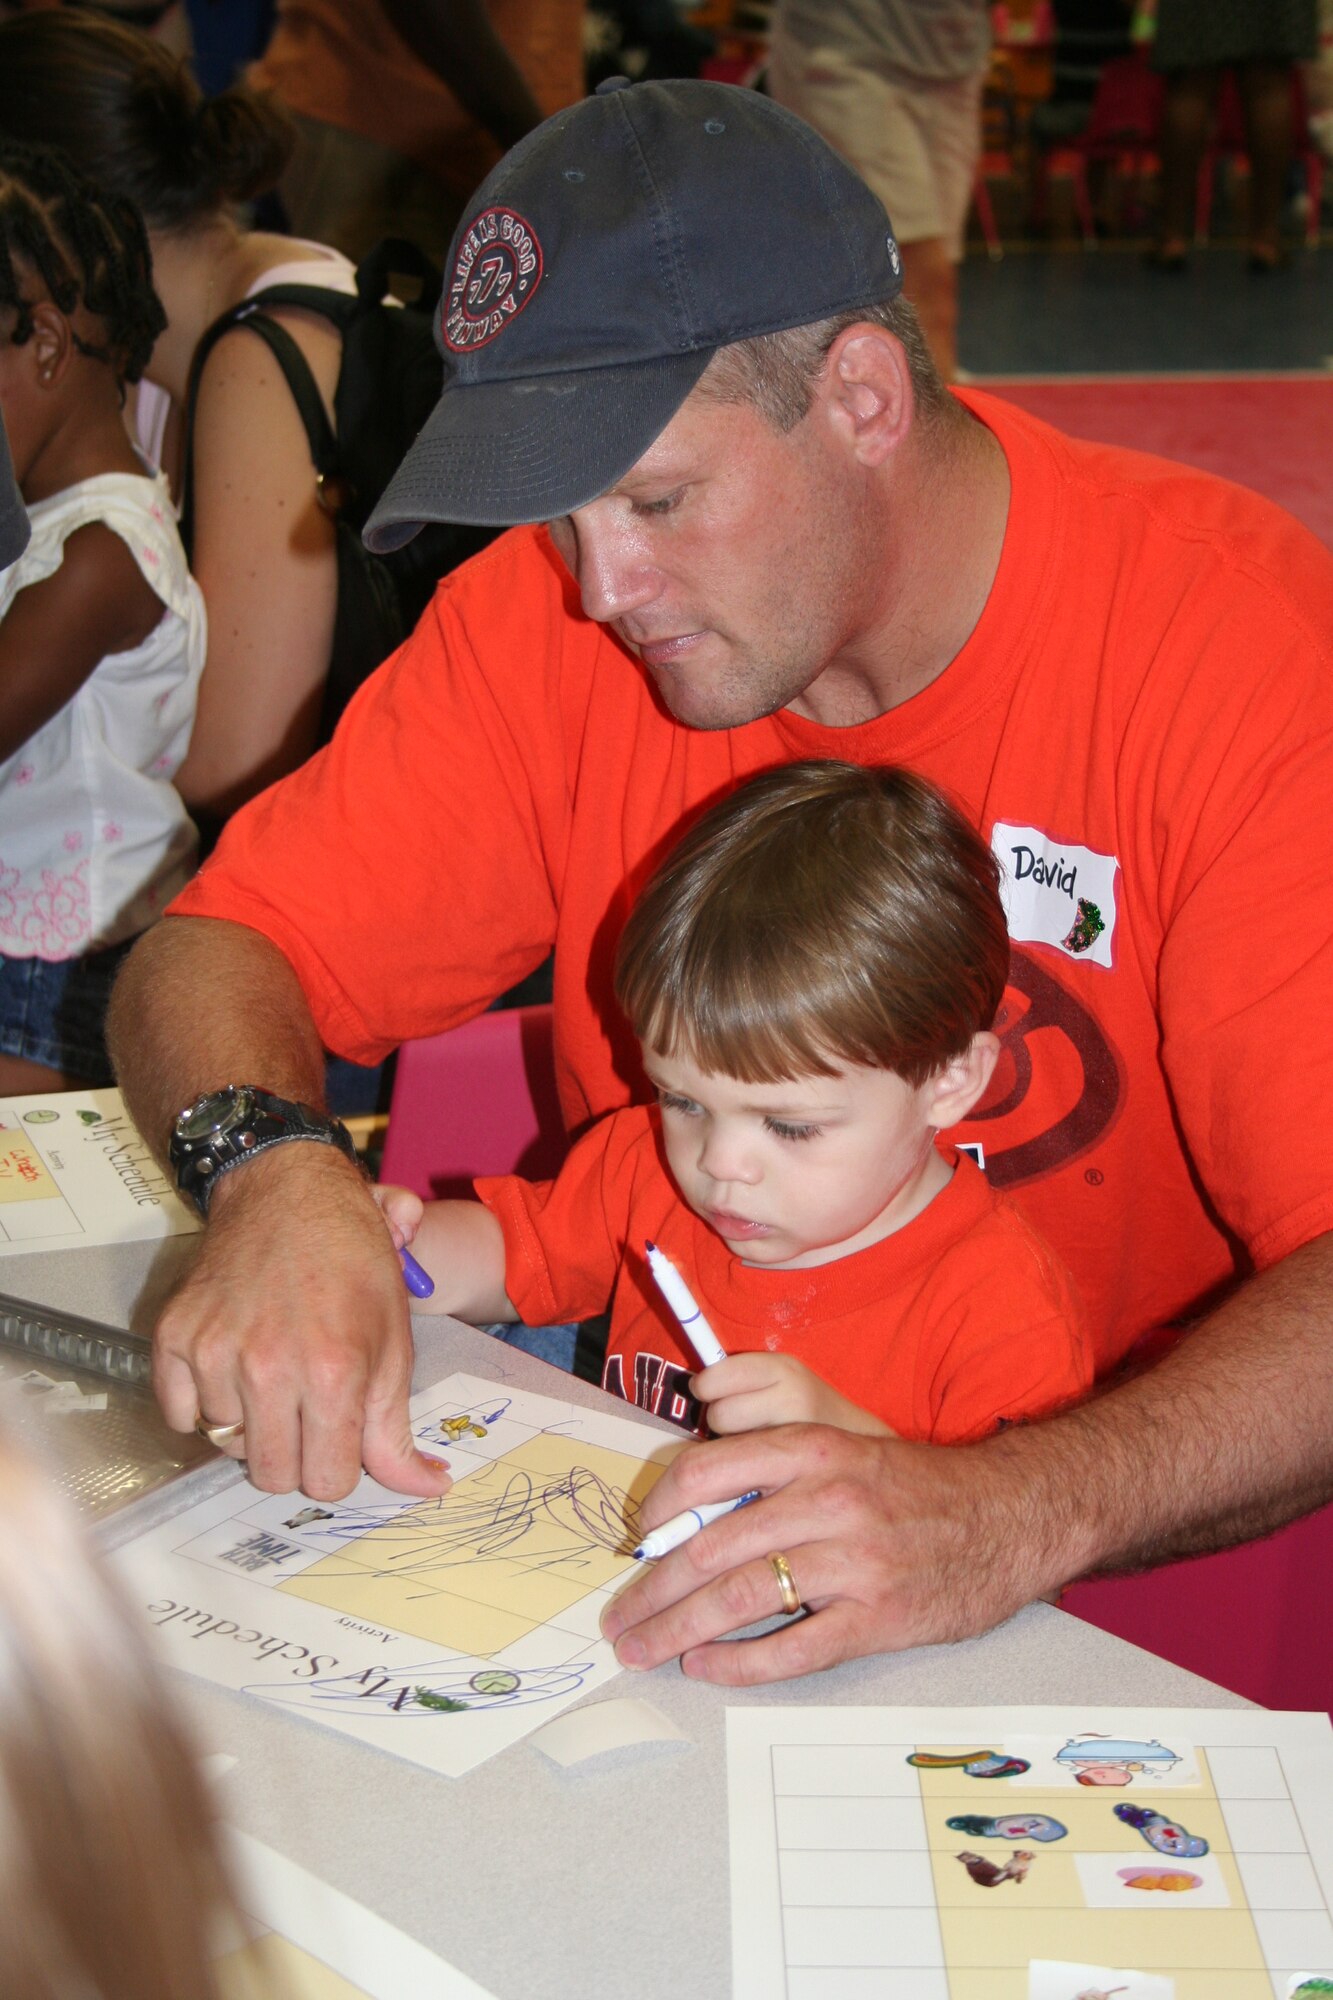 The Whitson's make an daily schedule using stickers and markers at the Tell Me a Story event on Sept. 22, 2007 at Eglin Air Force Base Youth Center. The event sponsered in part by the Miltary Child Education Coalition, and teaches parents and children to use everyday items to improve motor skills. (U.S. photo by Senior Airman Ali E. Flisek)